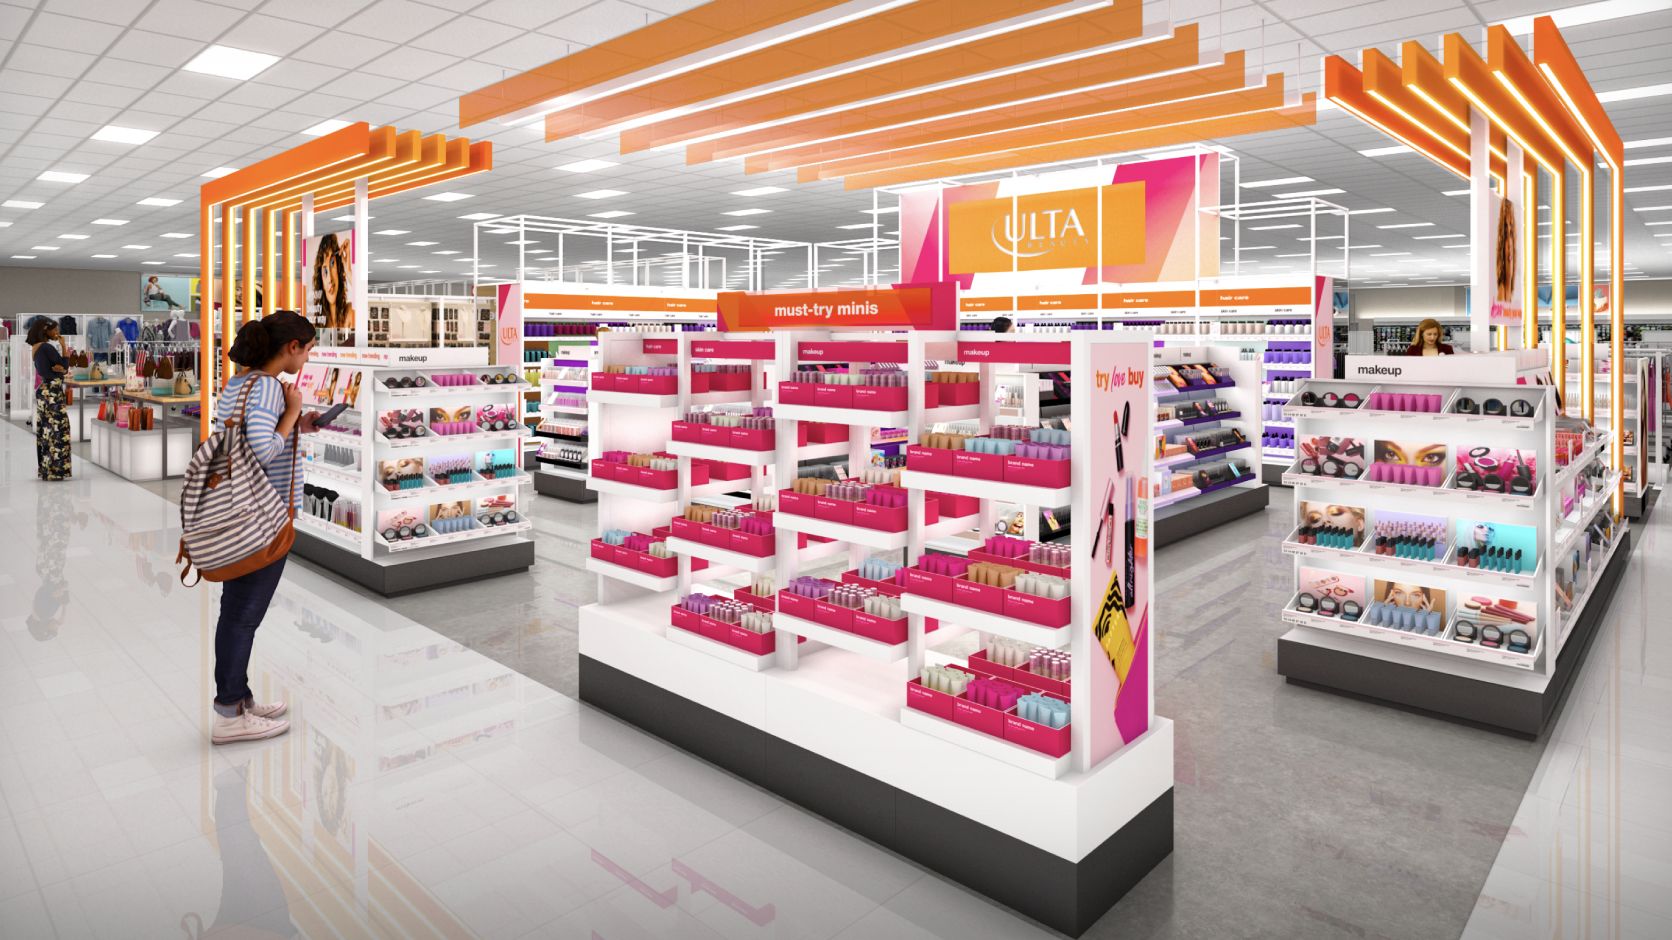 You can soon buy Clinique and MAC makeup at some Target stores | CNN